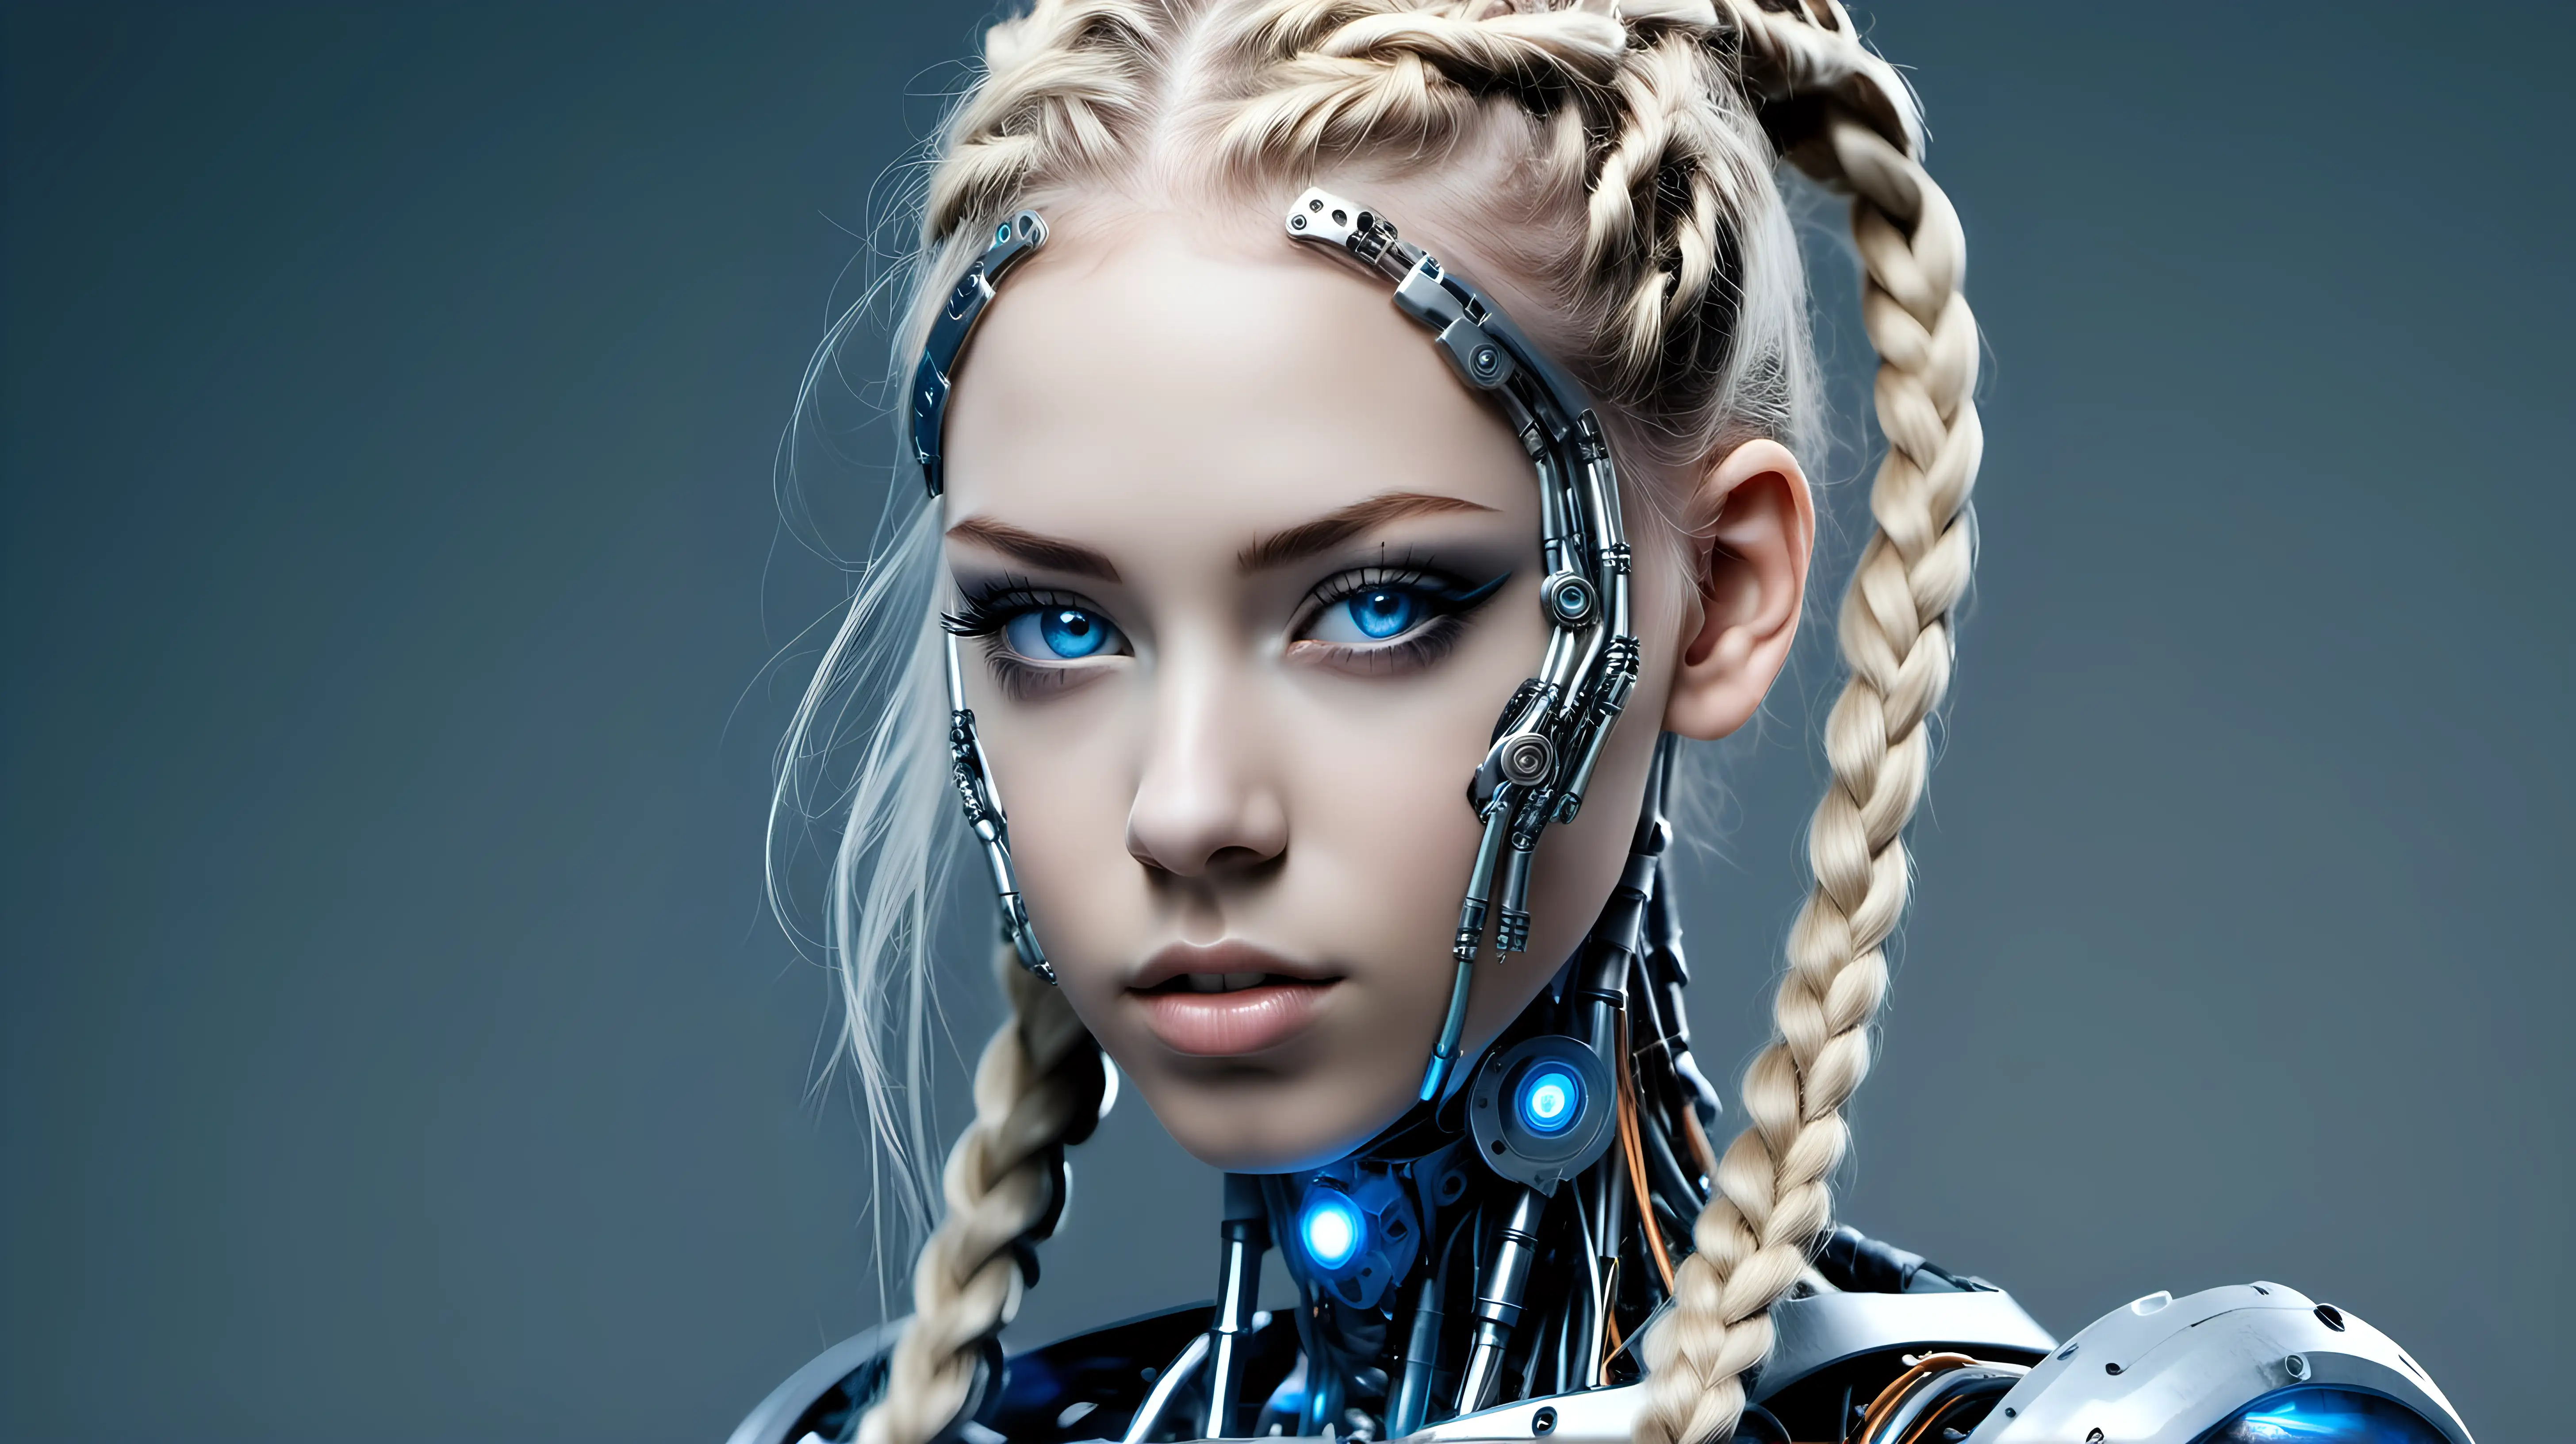 Stunning Cyborg Beauty with Blonde Braids and Blue Eyes